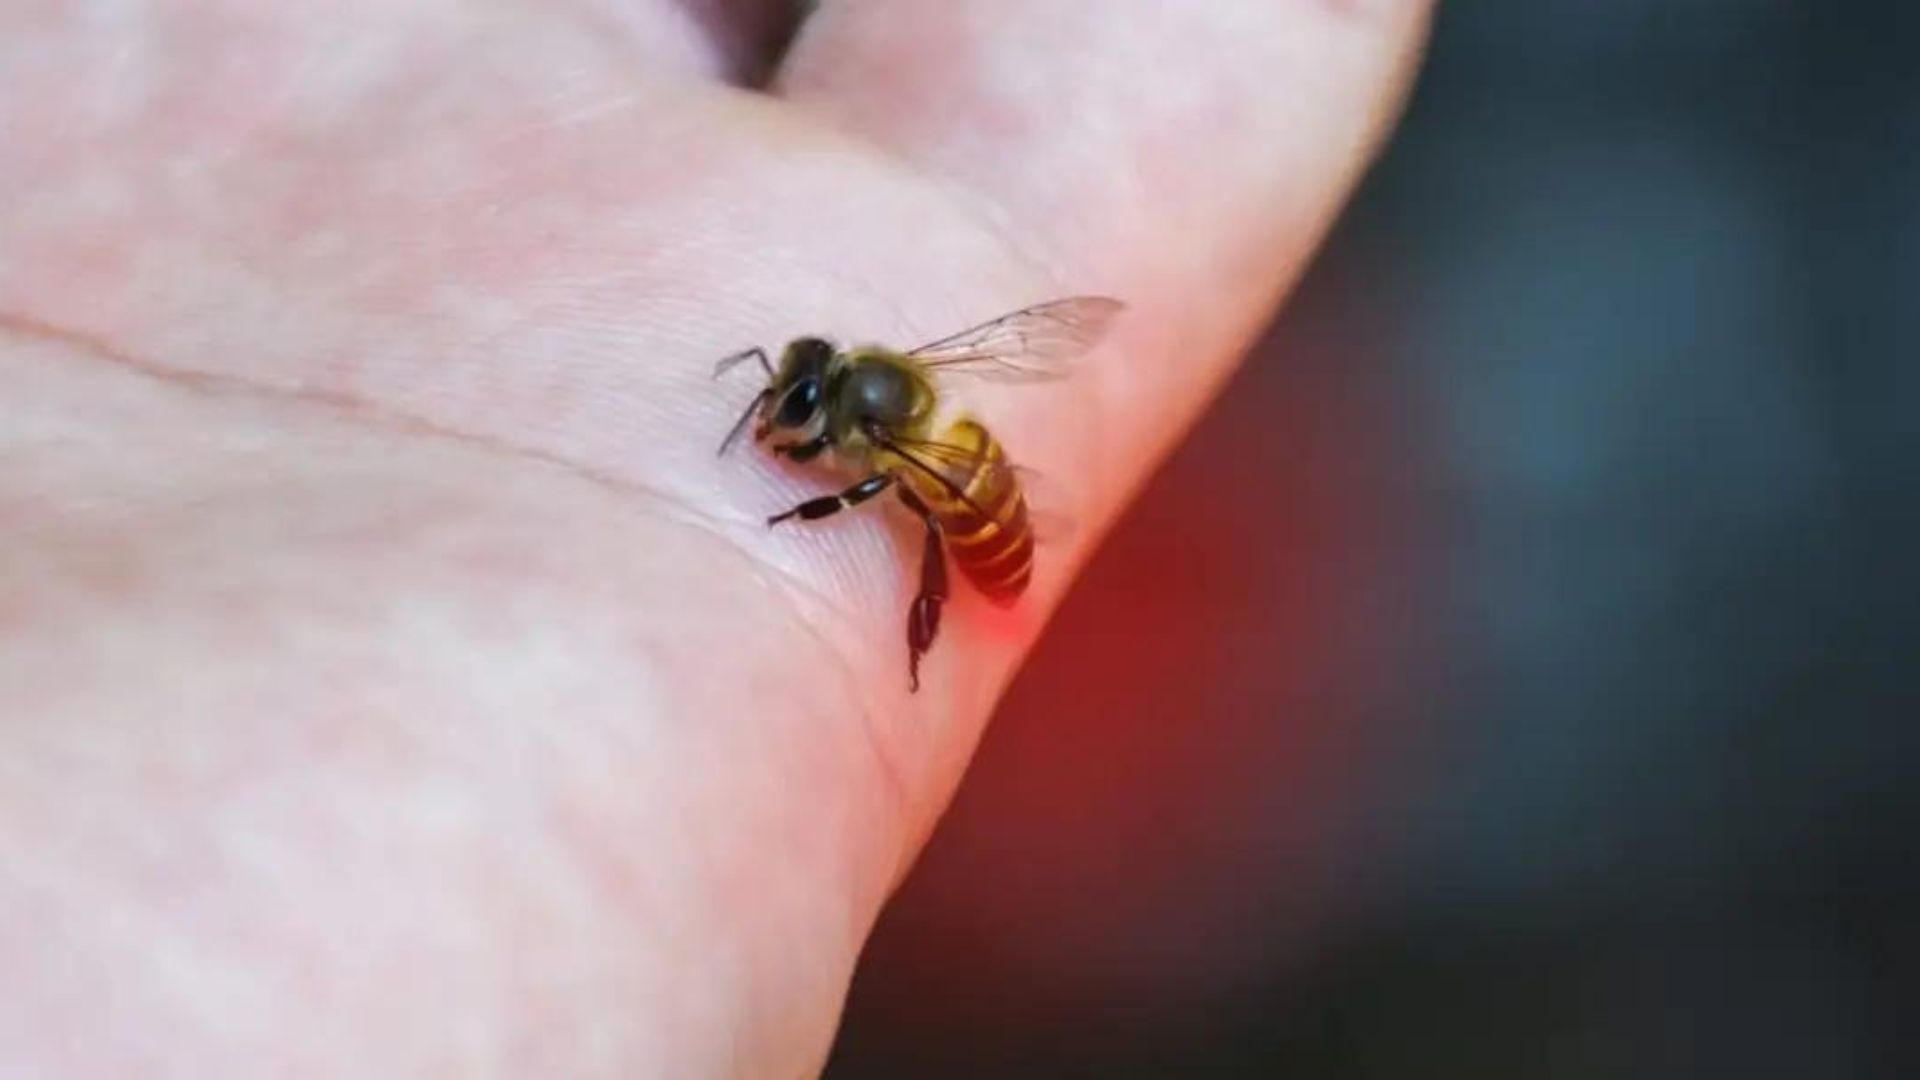 Bee Sting Treatment - Remedies to Stop Pain Quickly